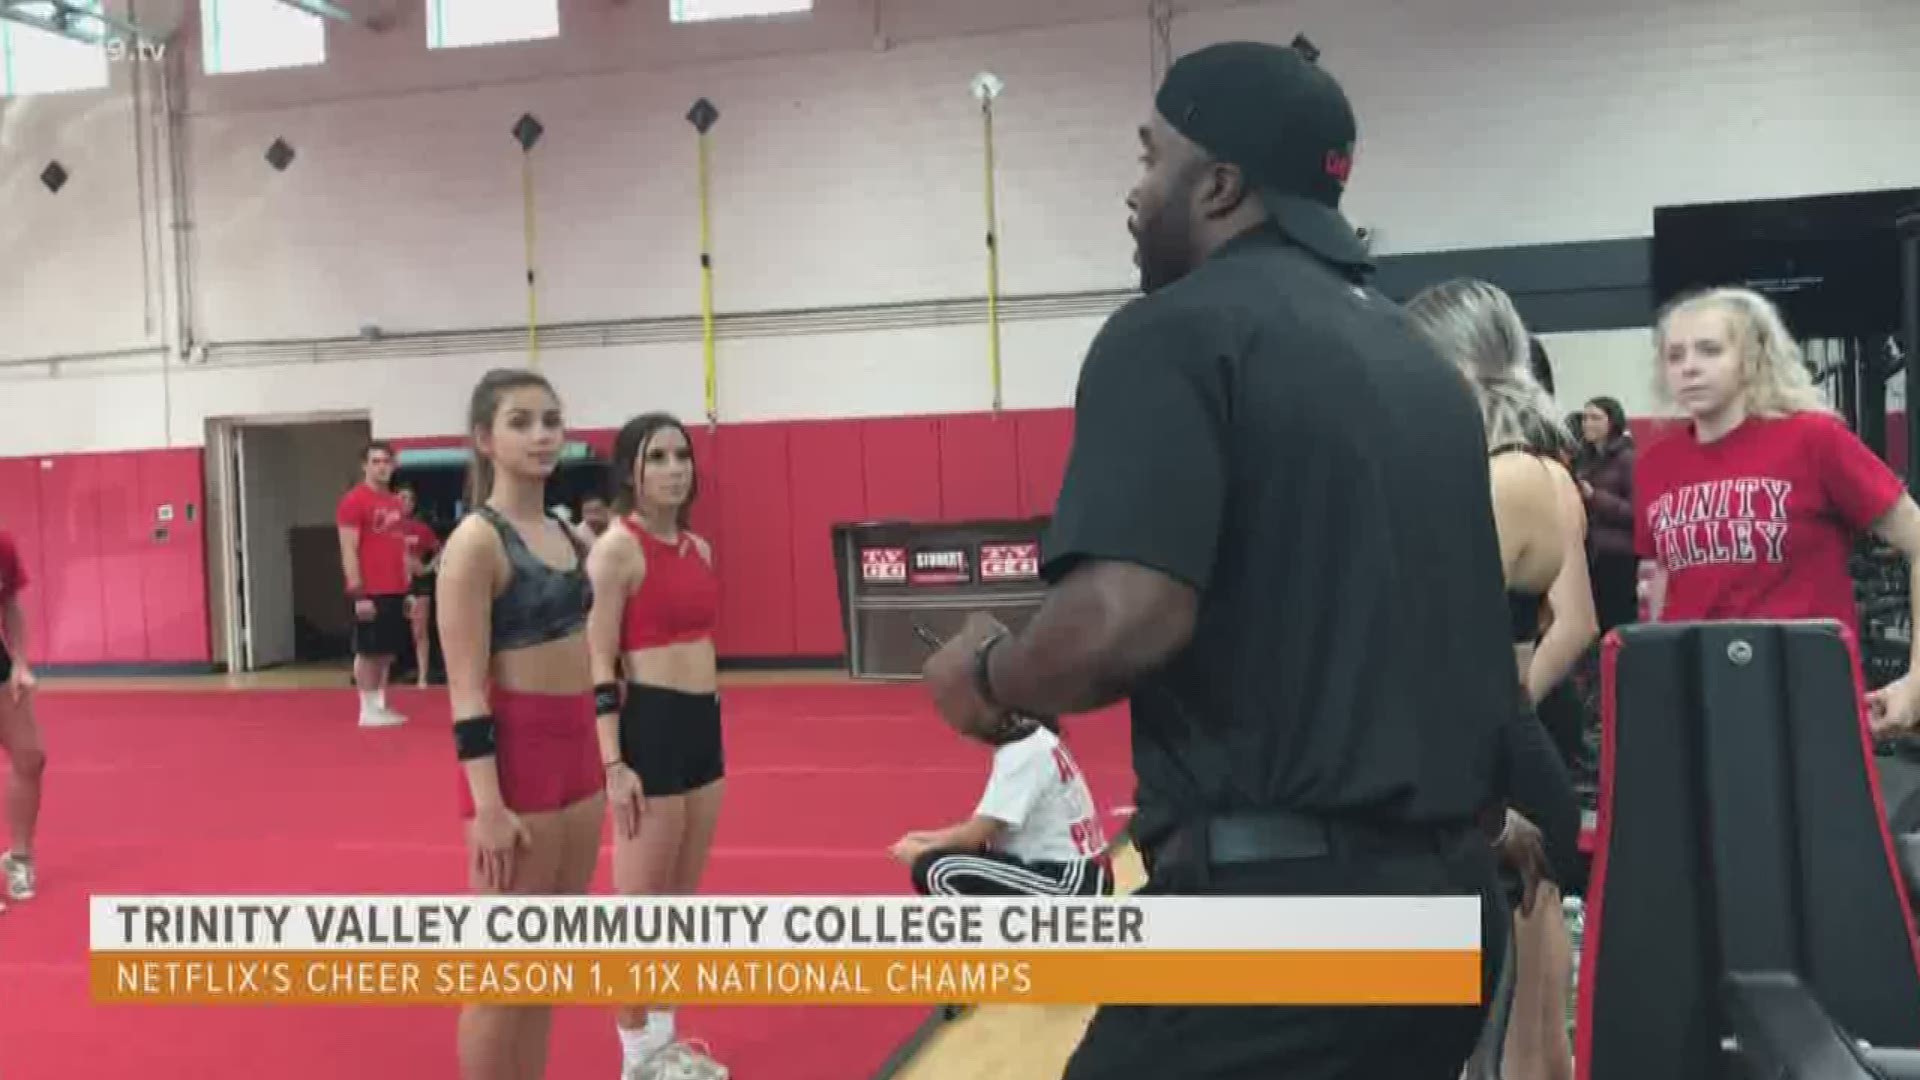 Netflix's Cheer season 1 gained national attention. It featured Navarro college, but also showed their rivals 11x national champs Trinity Valley Community College.